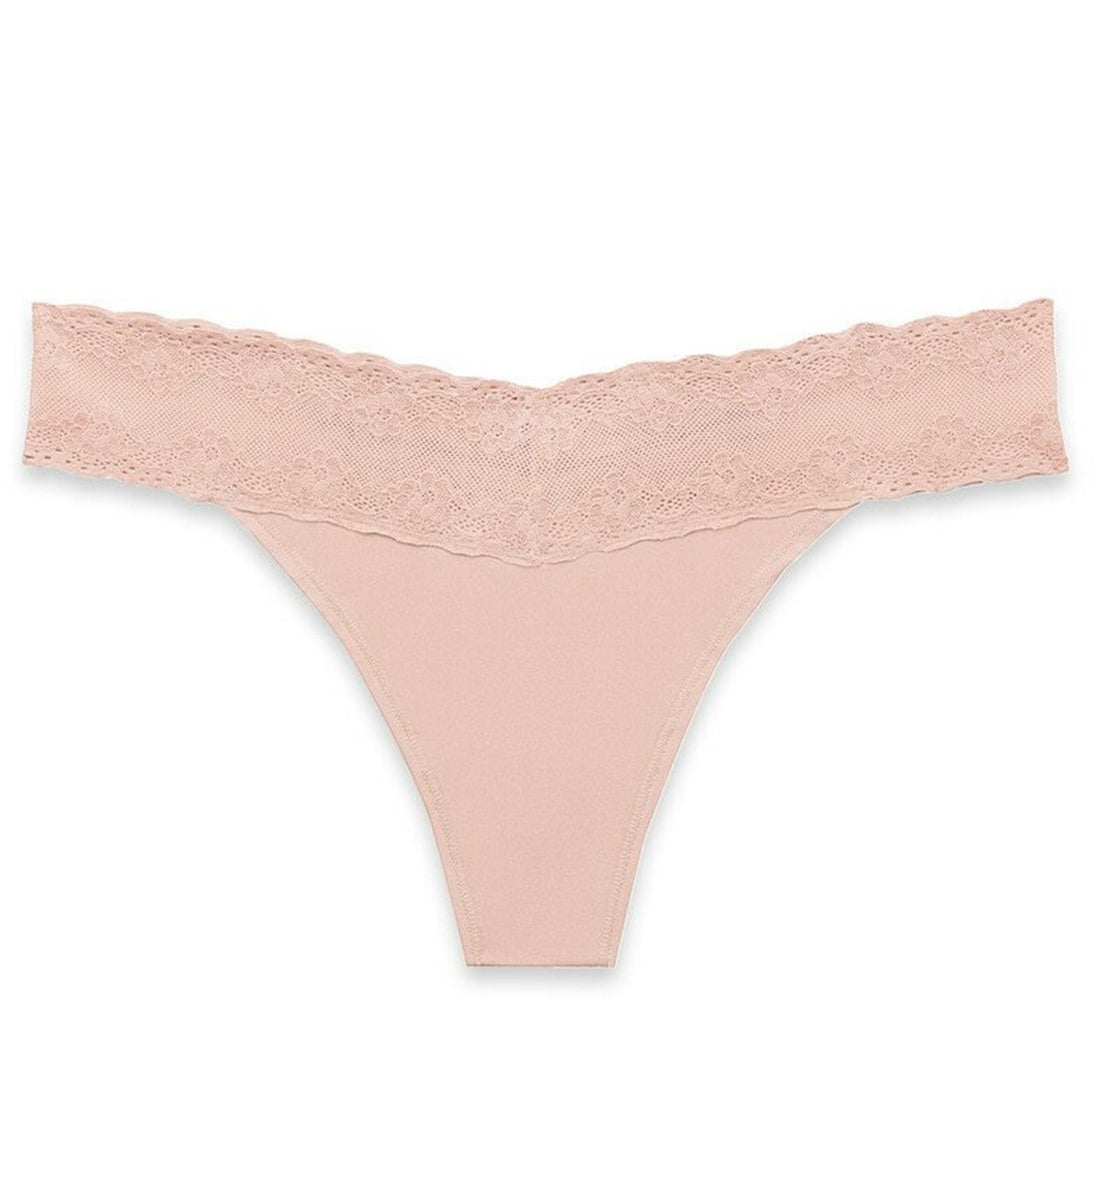 Natori Bliss Perfection Thong (750092),Rose Beige - Rose Beige,One Size